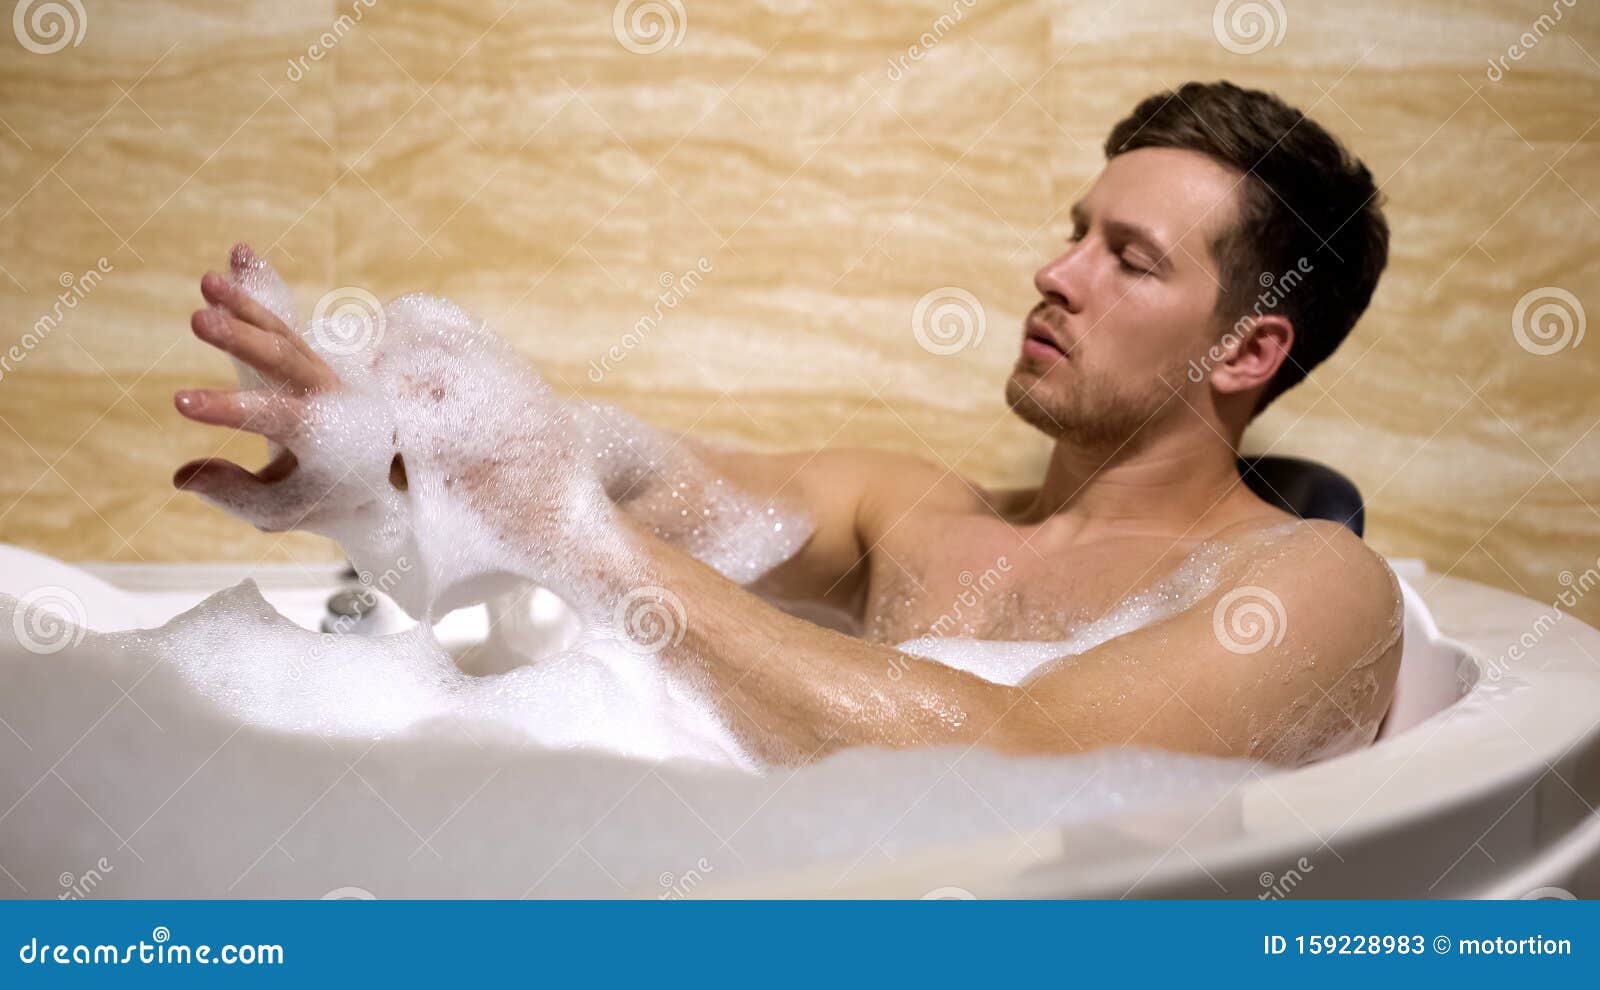 scrupulous man soaping himself with loofah, taking bath with foam, cleanness